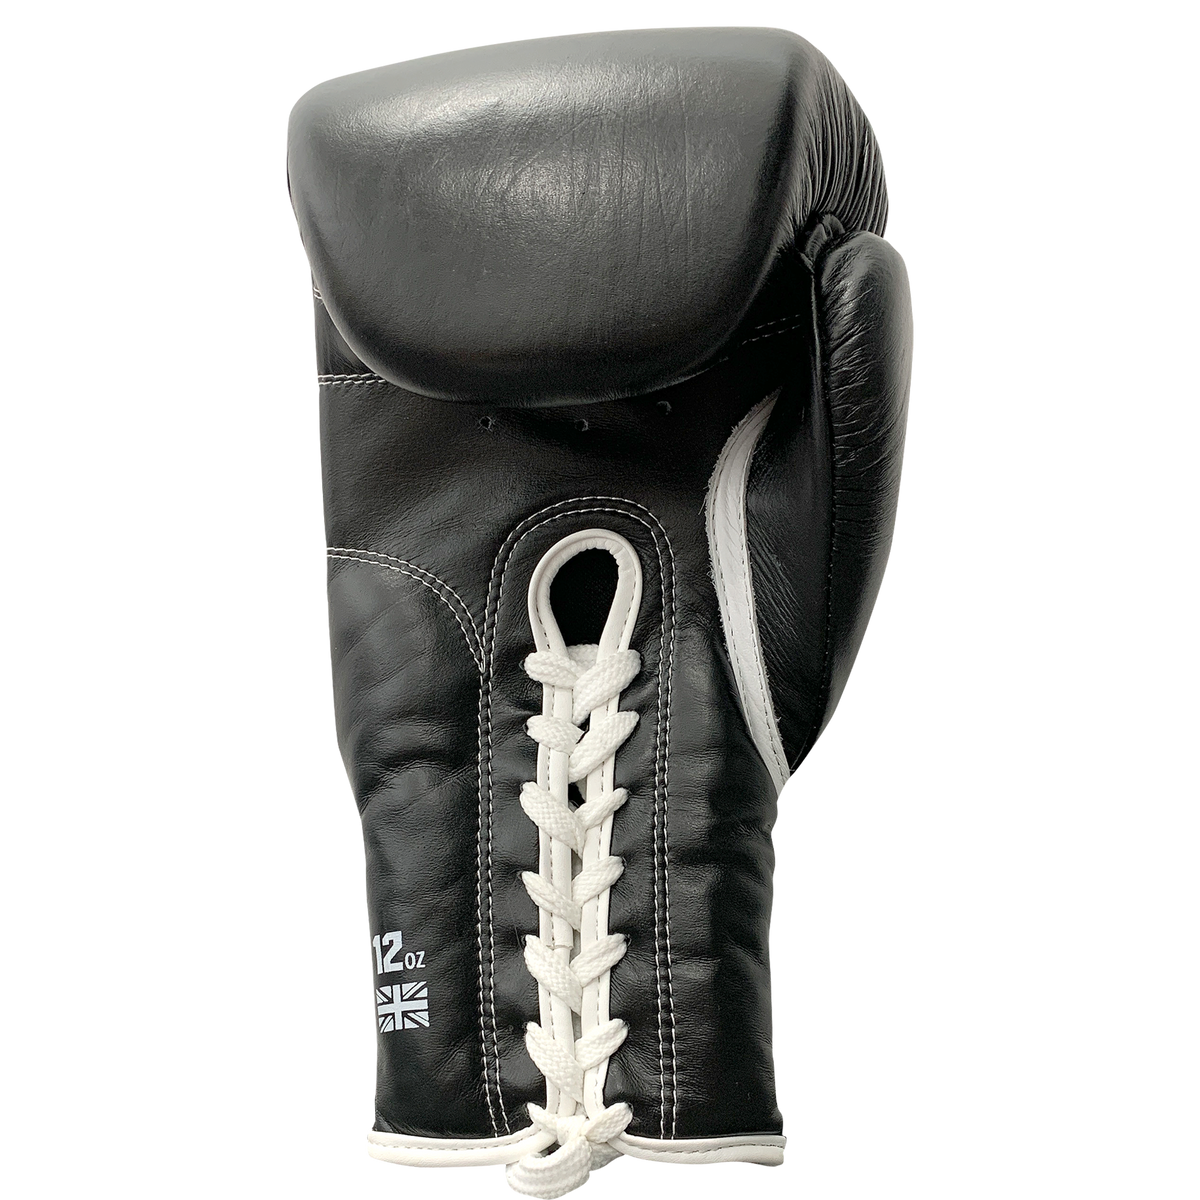 Affordable Pro Laced Boxing Gloves | Sparring Gloves | Lace Up ...